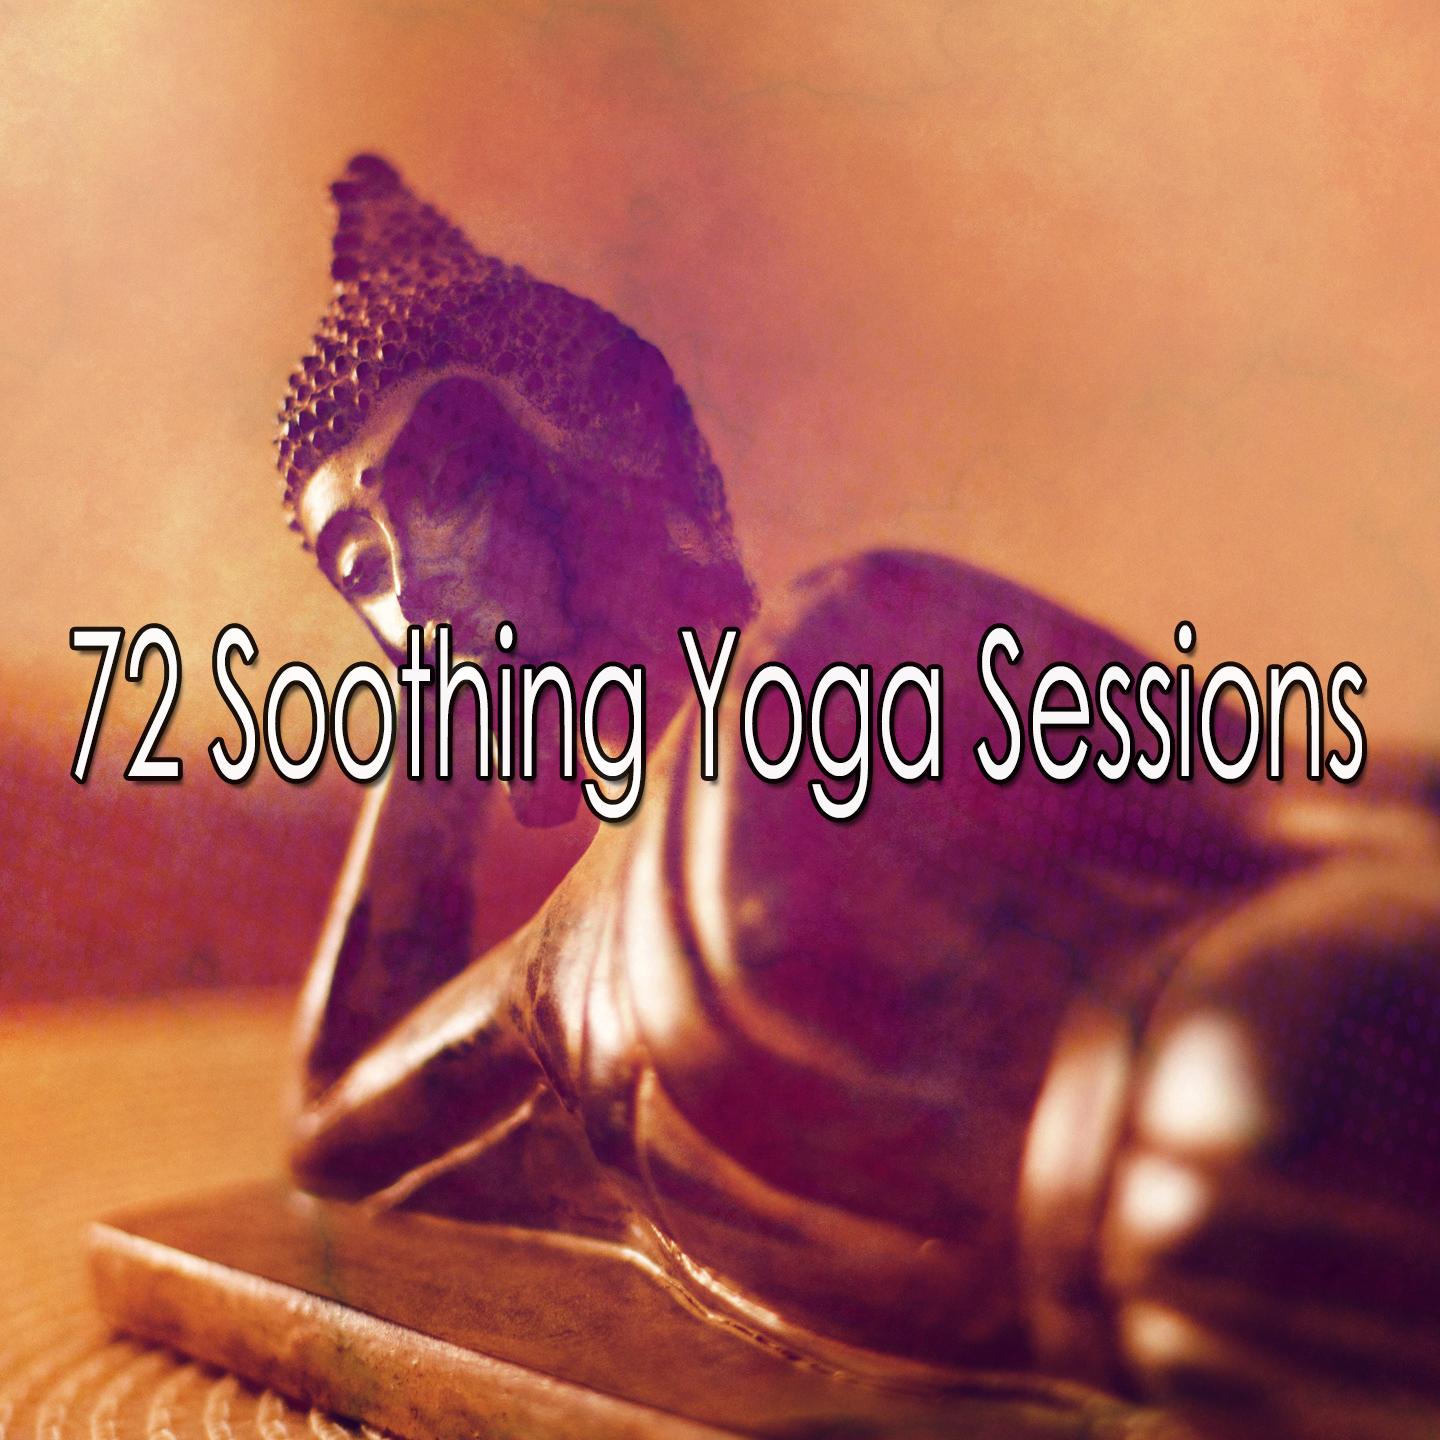 72 Soothing Yoga Sessions